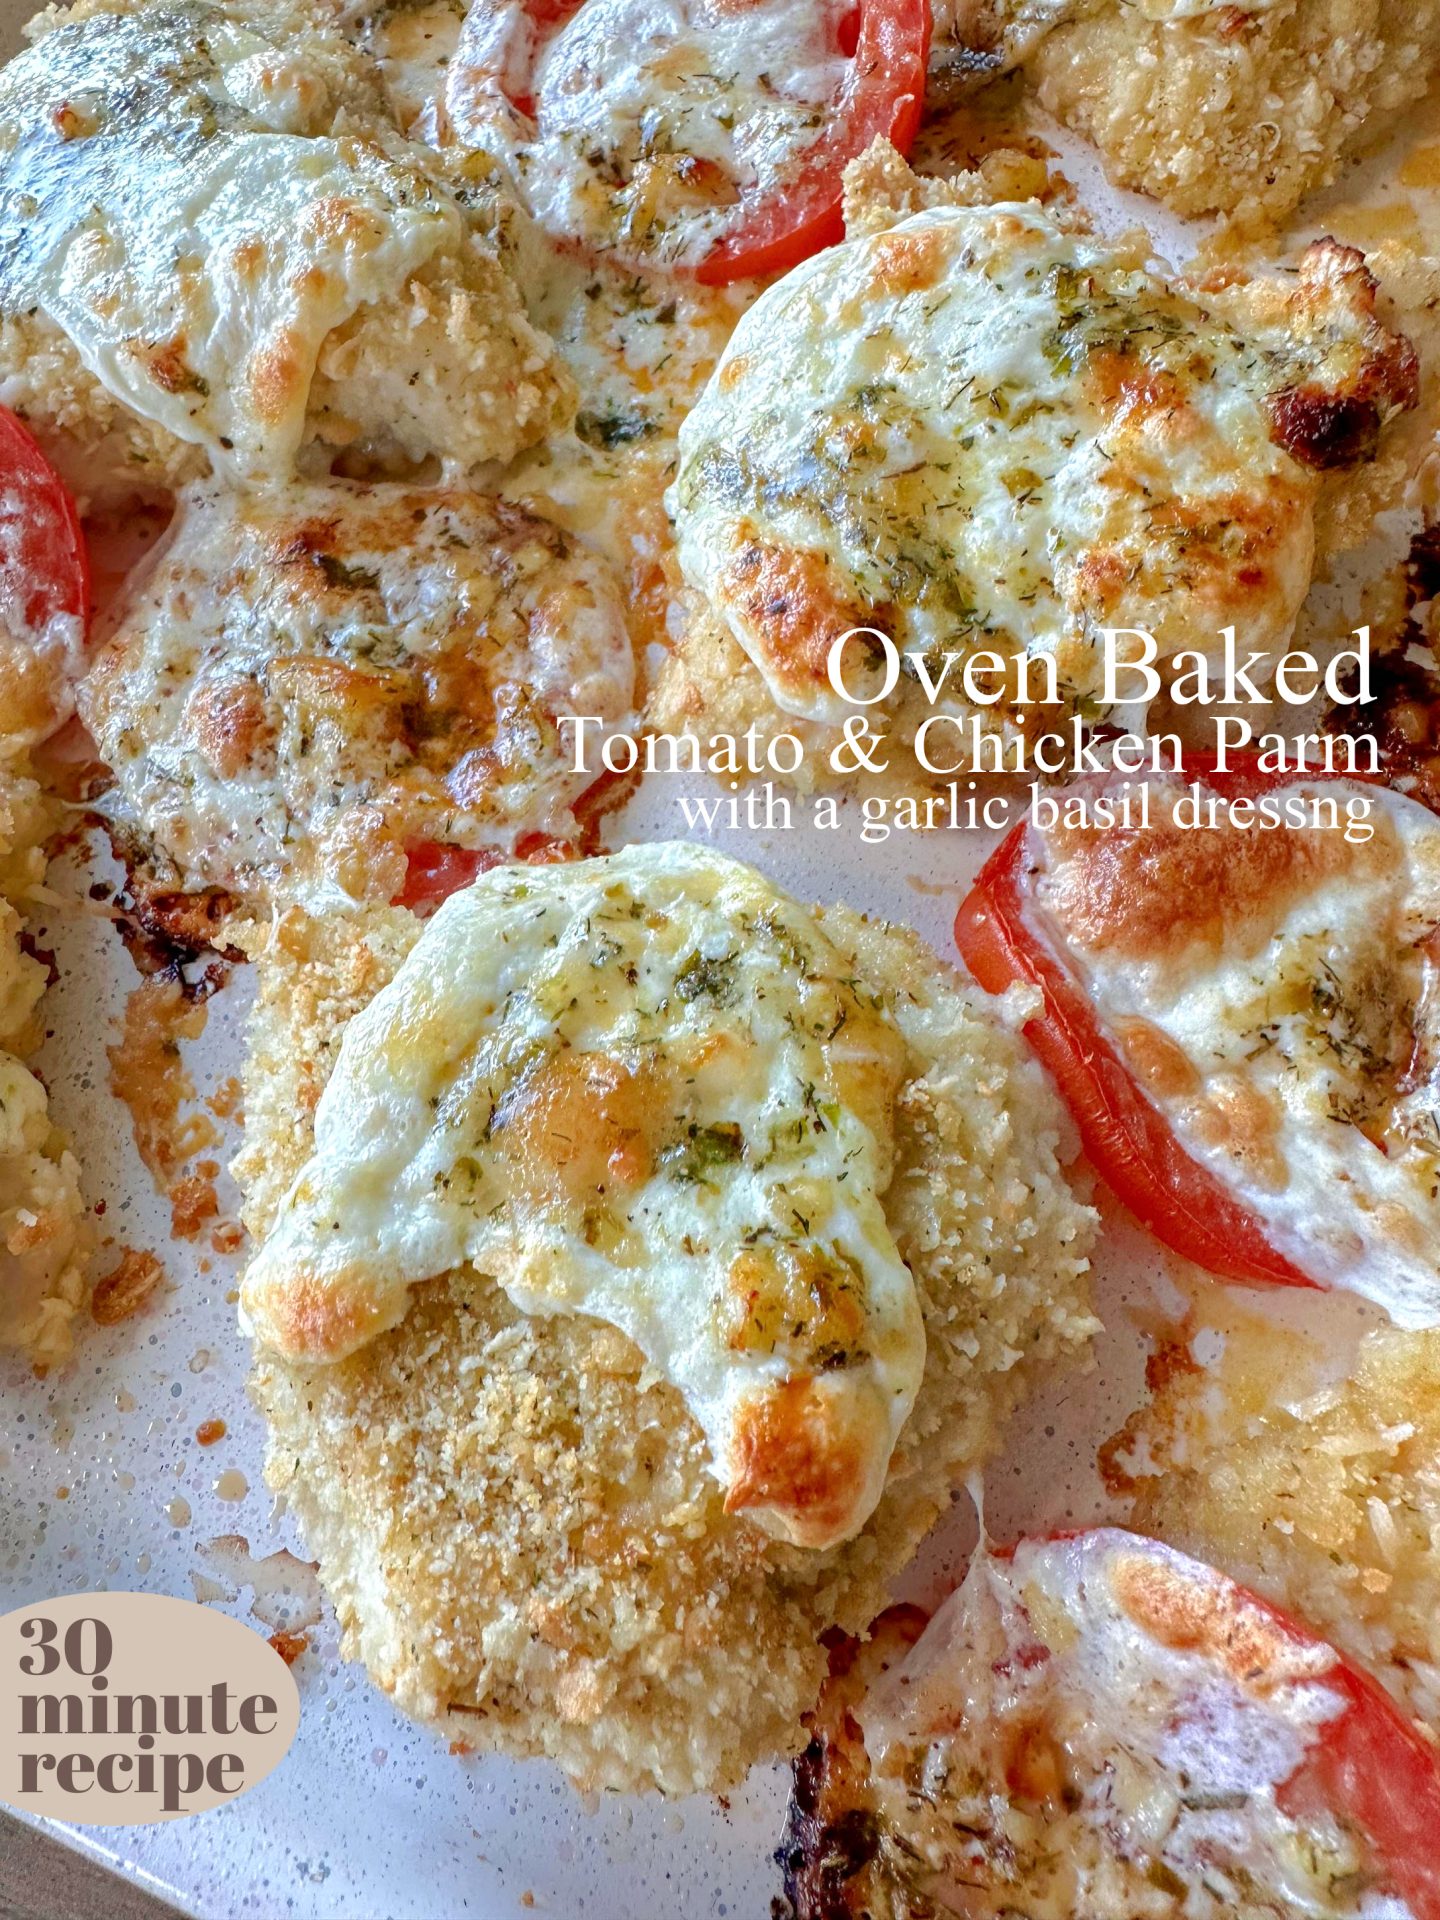 chicken parm, gluten-free, Italian bread crumbs, tomatoes, fried tomatoes, mozzarella , fresh warm, chicken dinner, healthy dinner night, food idea, quick easy meal, food